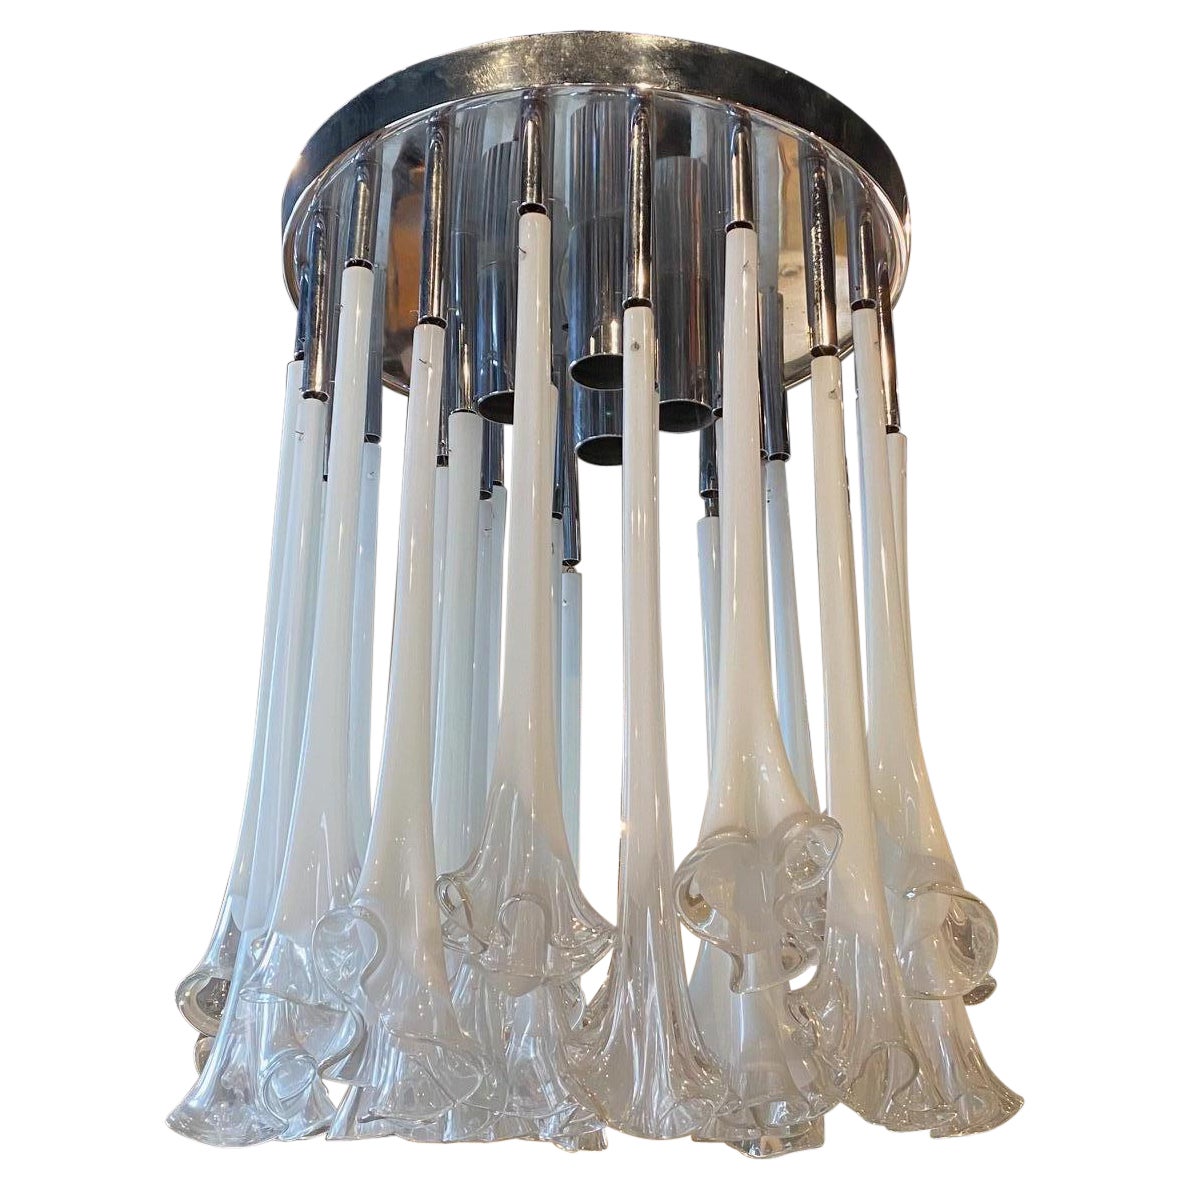  Murano  Flush Mount  Chandelier  "Calle" by Ettore Fantasia and Gino Poli  For Sale